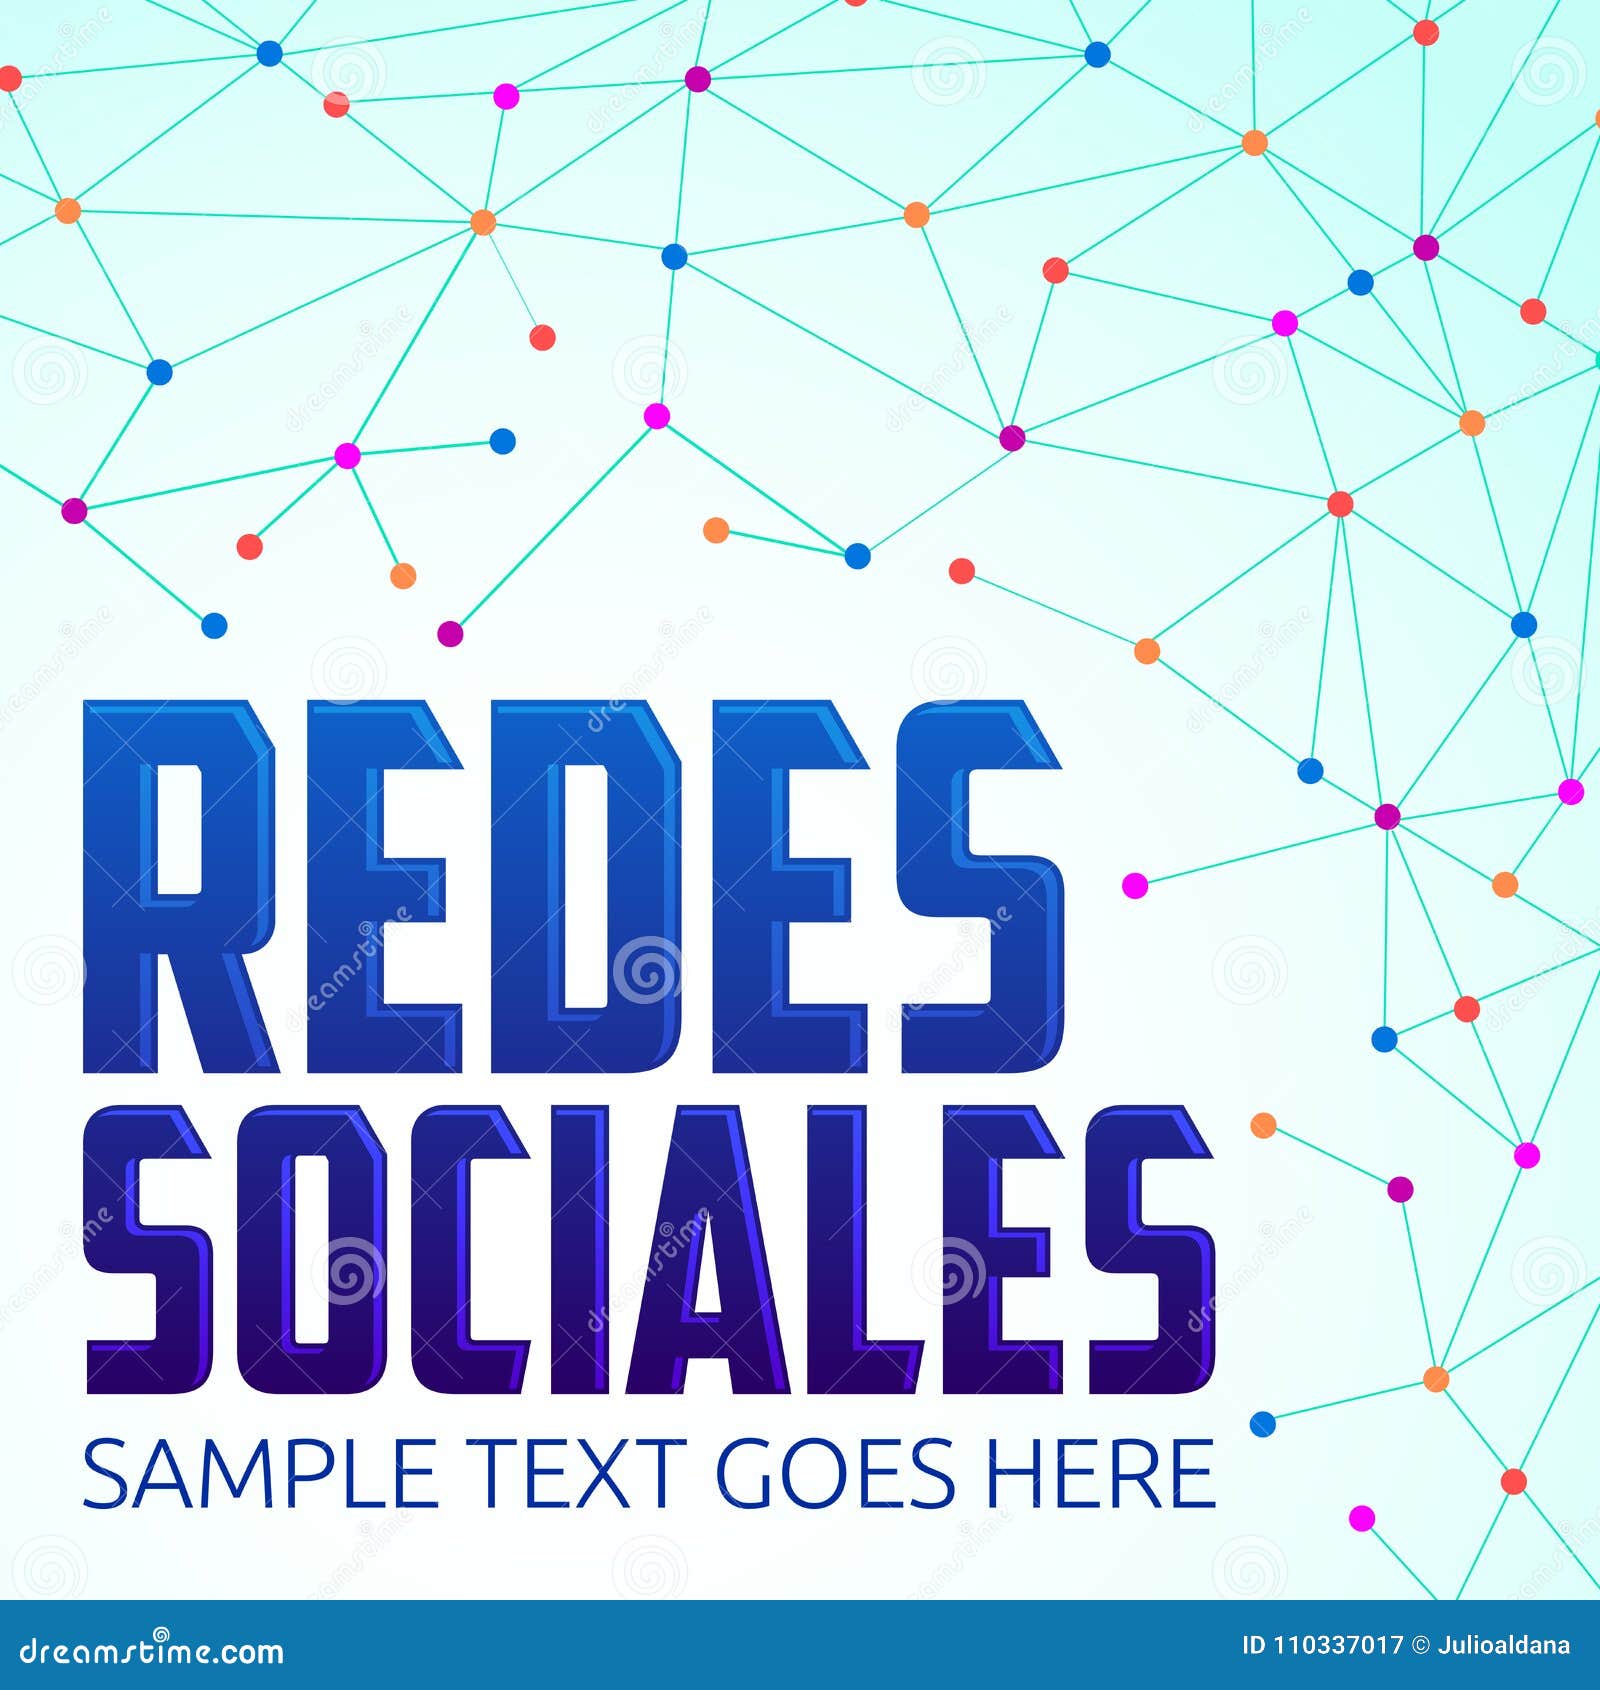 redes sociales, social networks spanish text